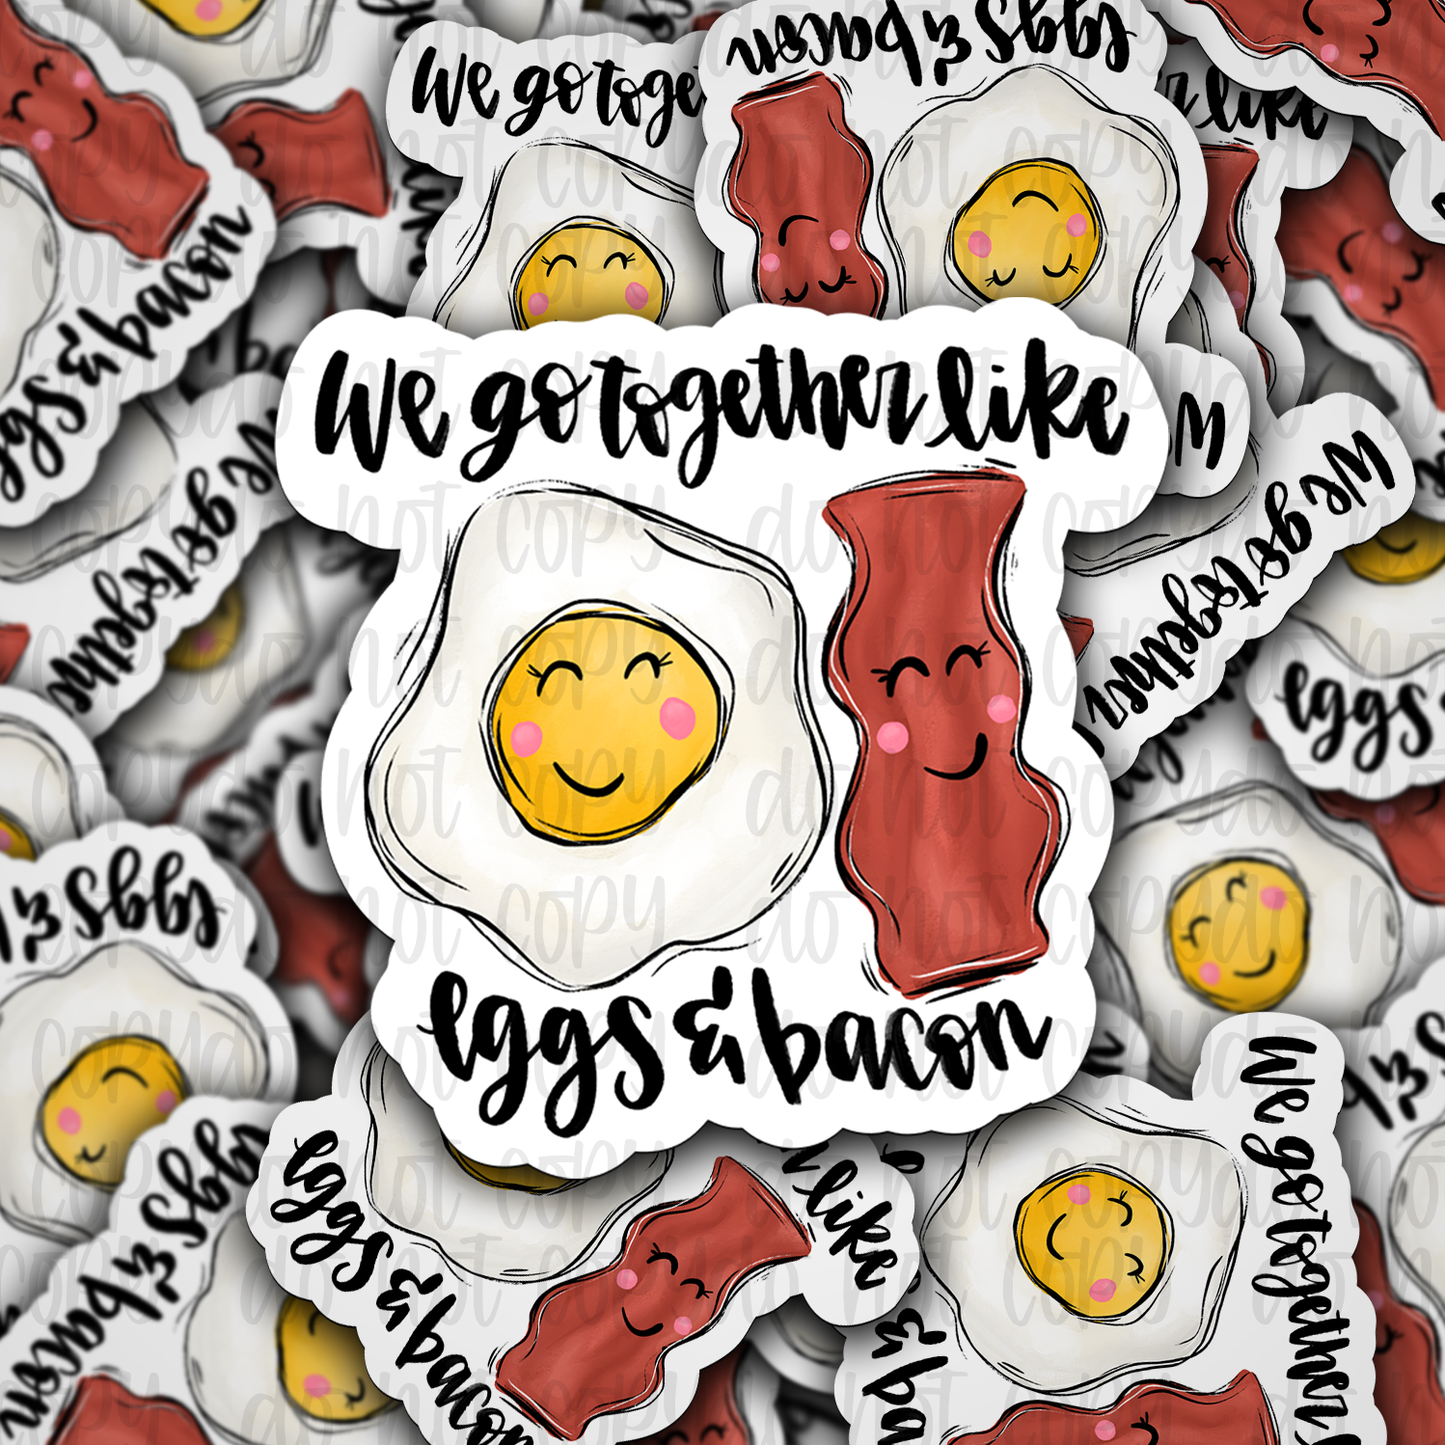 We go together like bacon and eggs Die cut sticker 3-5 Business Day TAT